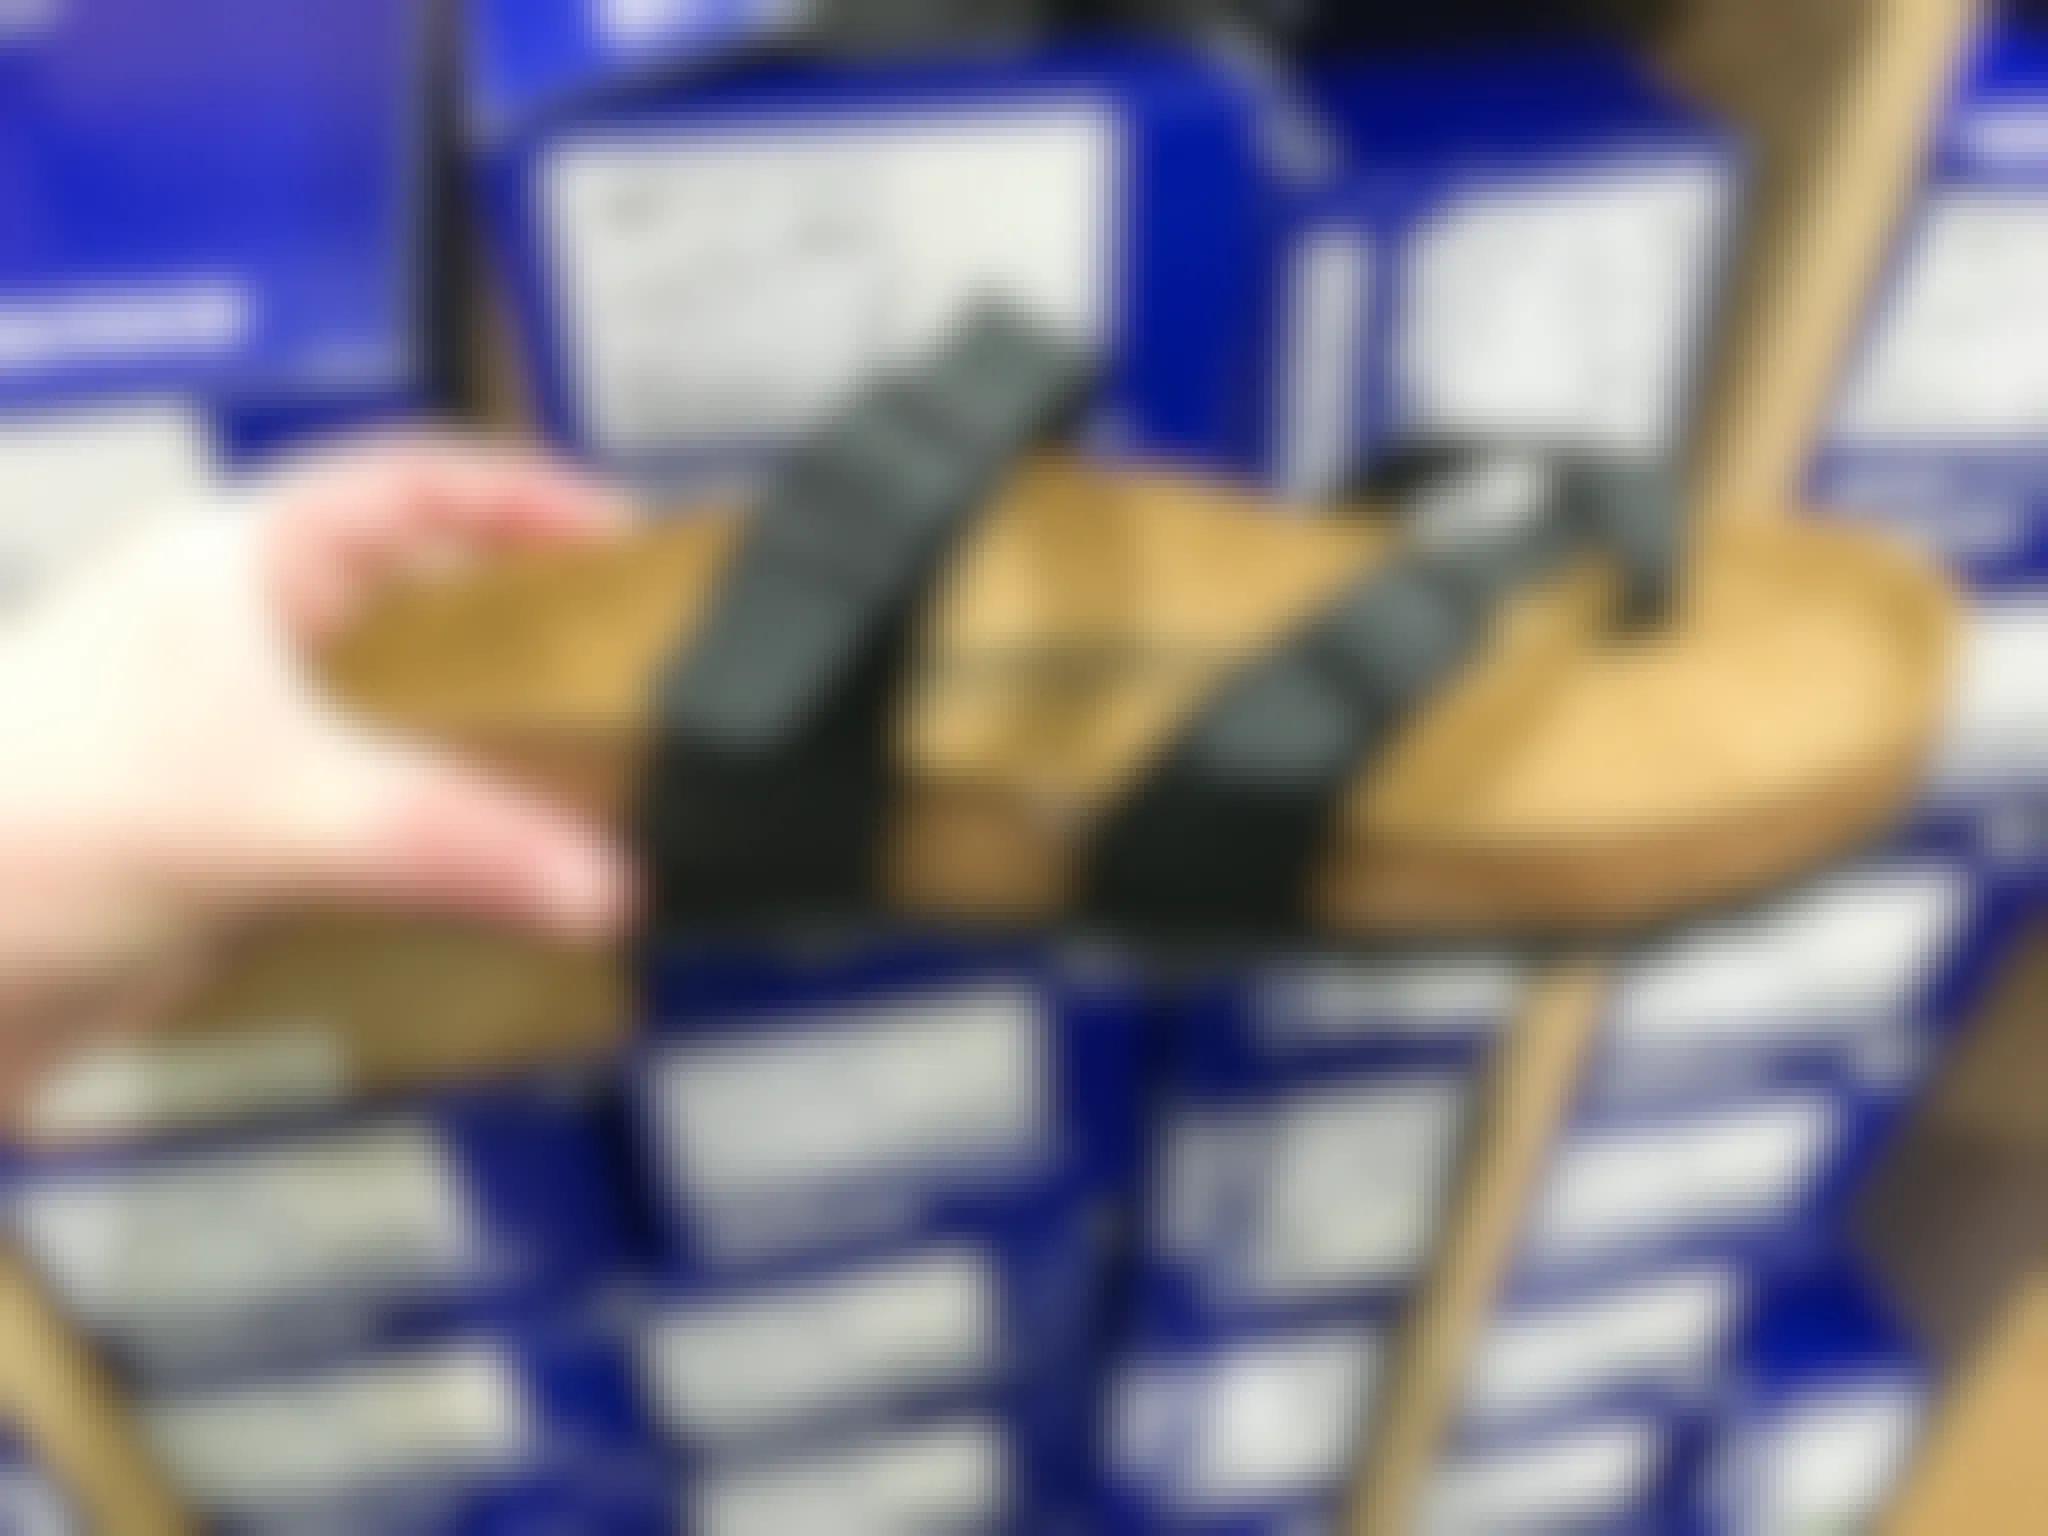 A person's hand holding a Birkenstock sandal in front of Birkenstock shoeboxes.